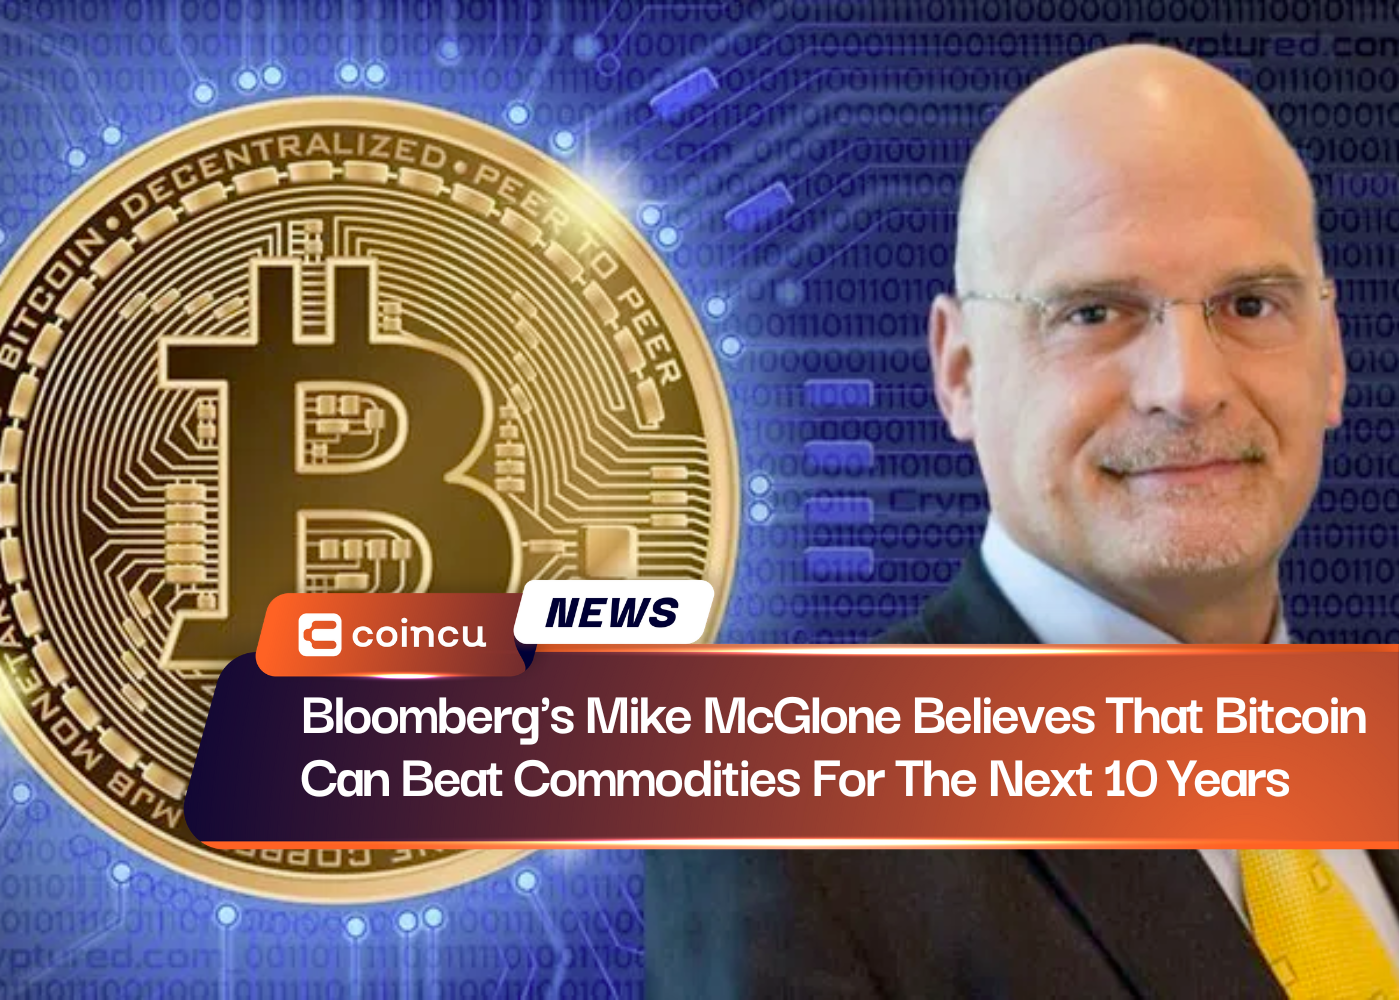 Bloomberg's Mike McGlone Believes That Bitcoin Can Beat Commodities For The Next 10 Years